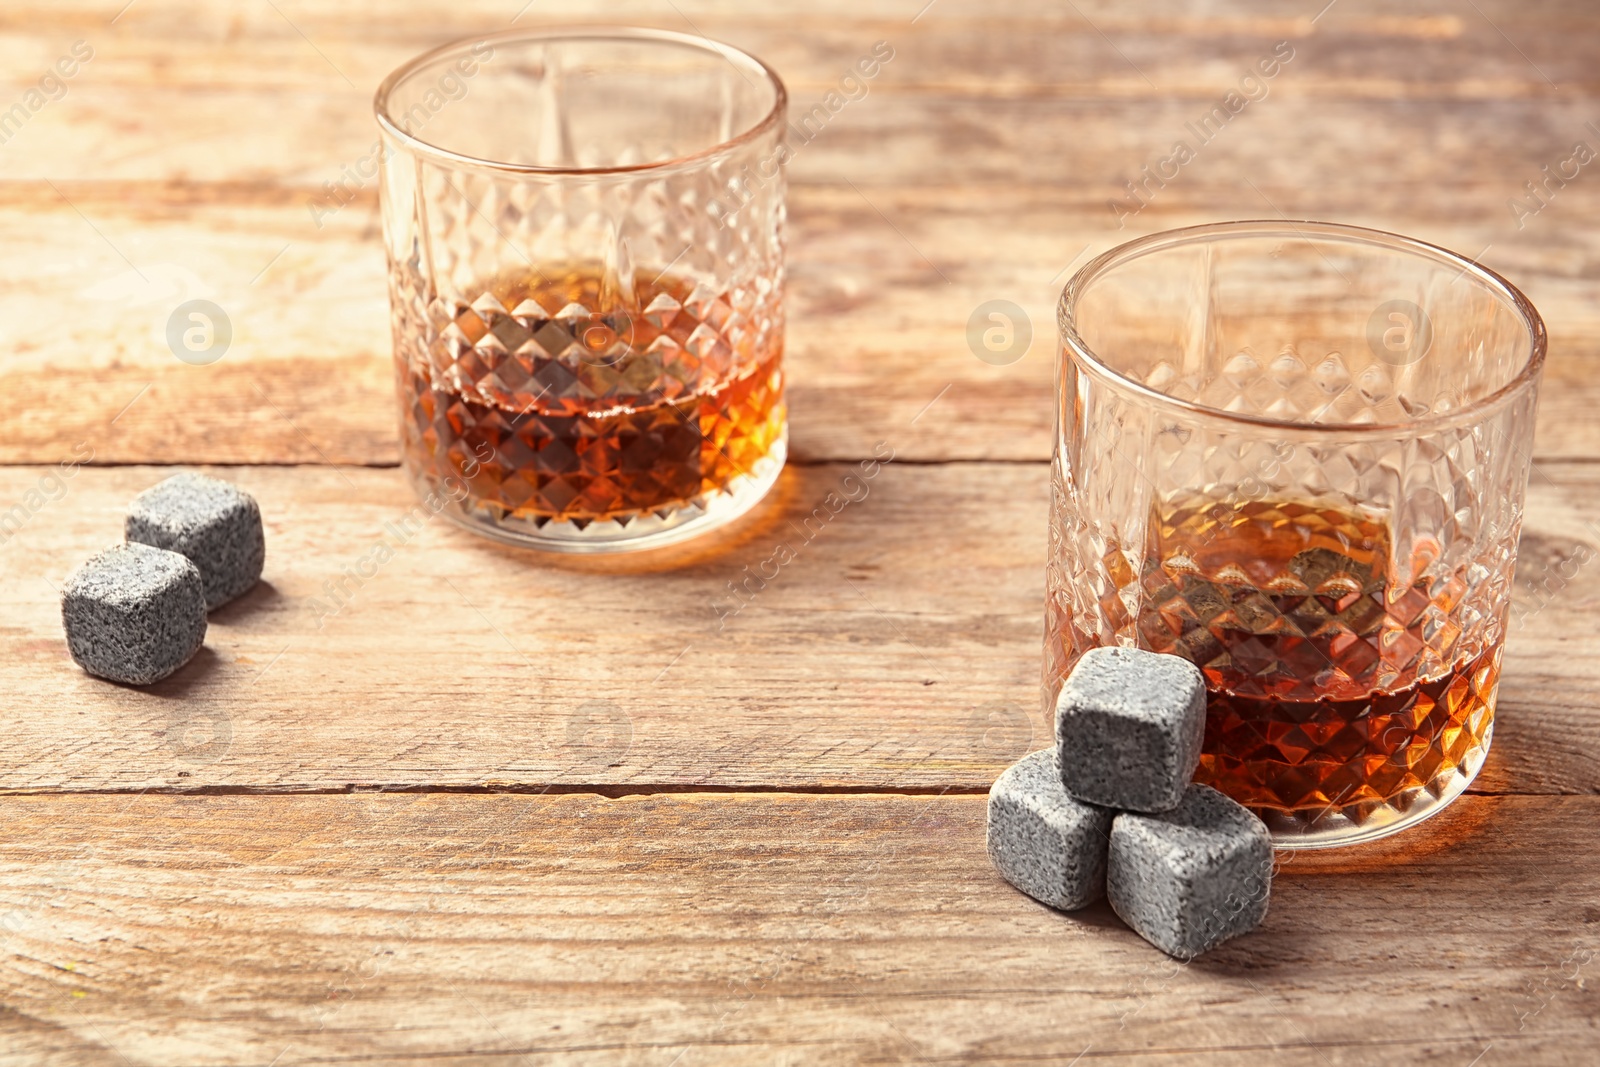 Photo of Glasses with liquor and whiskey stones on table